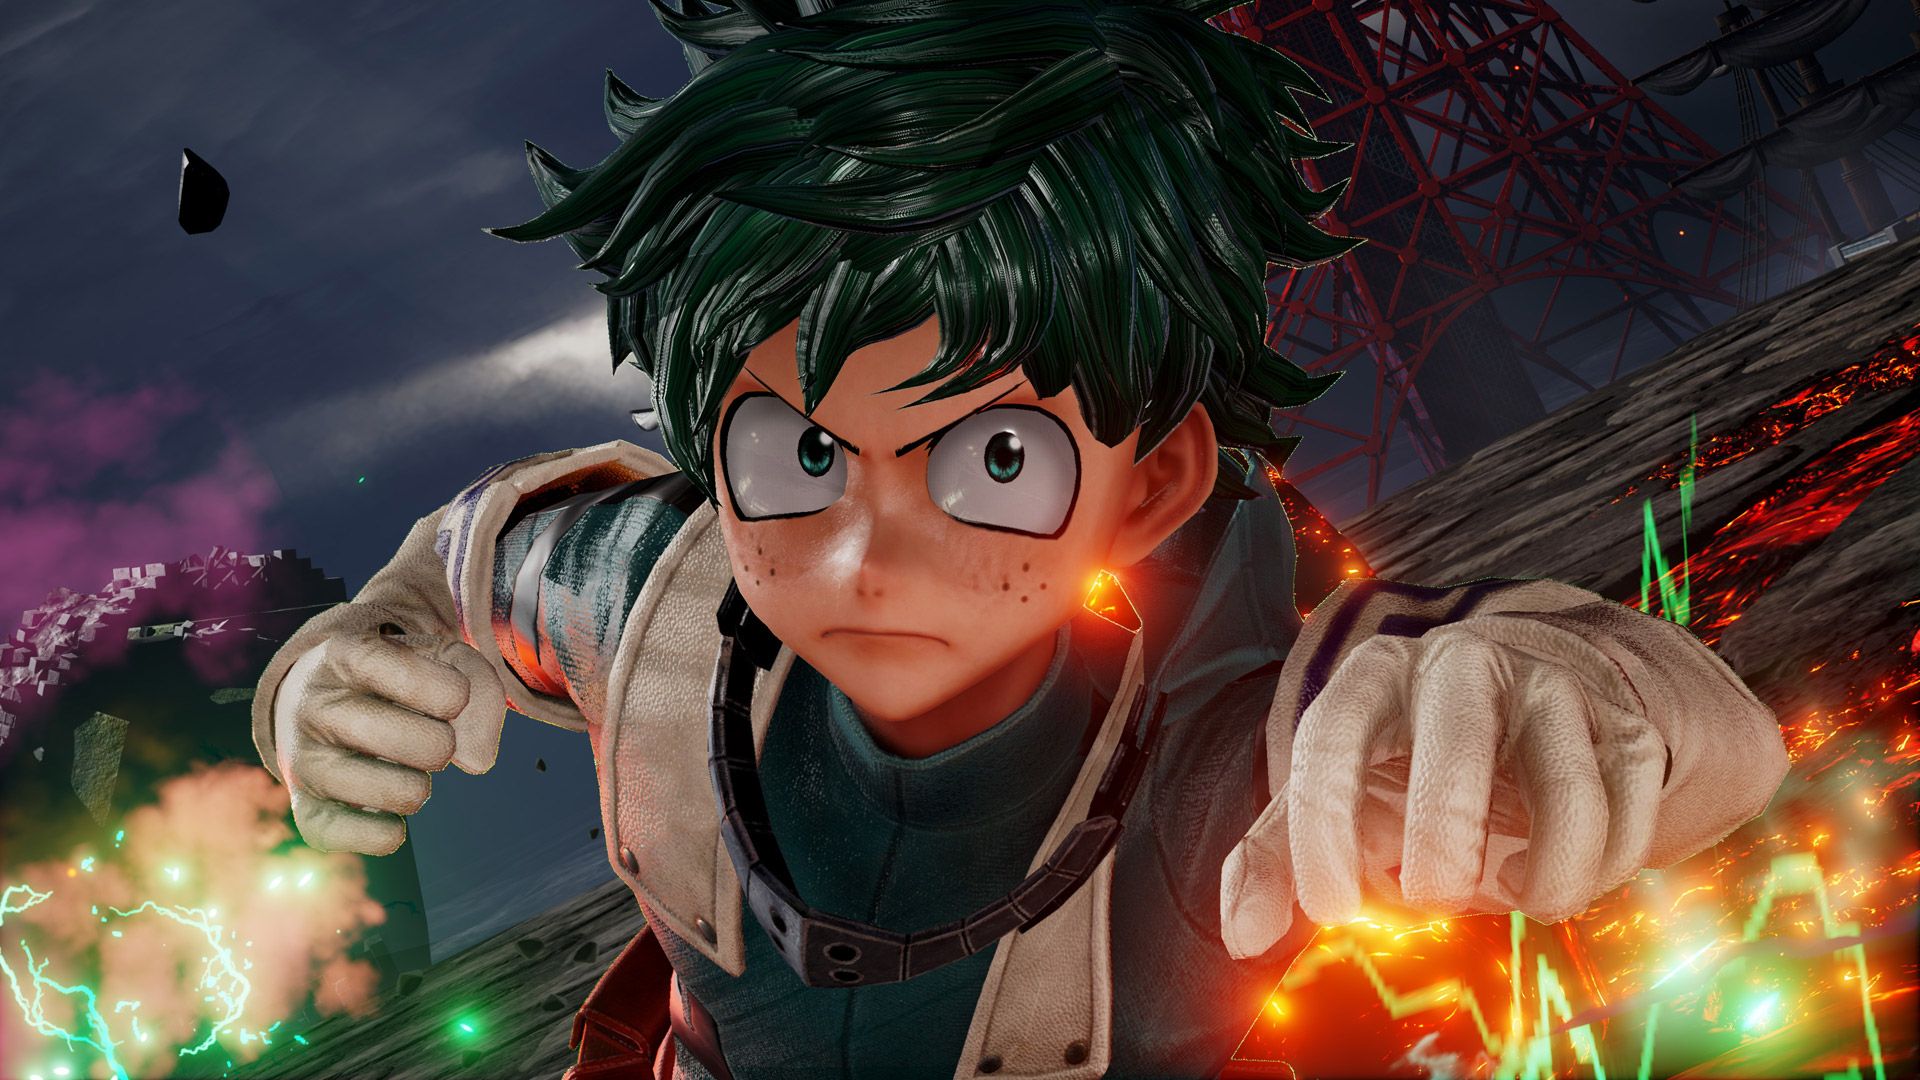 Free Jump Force Wallpaper in 1920x1080